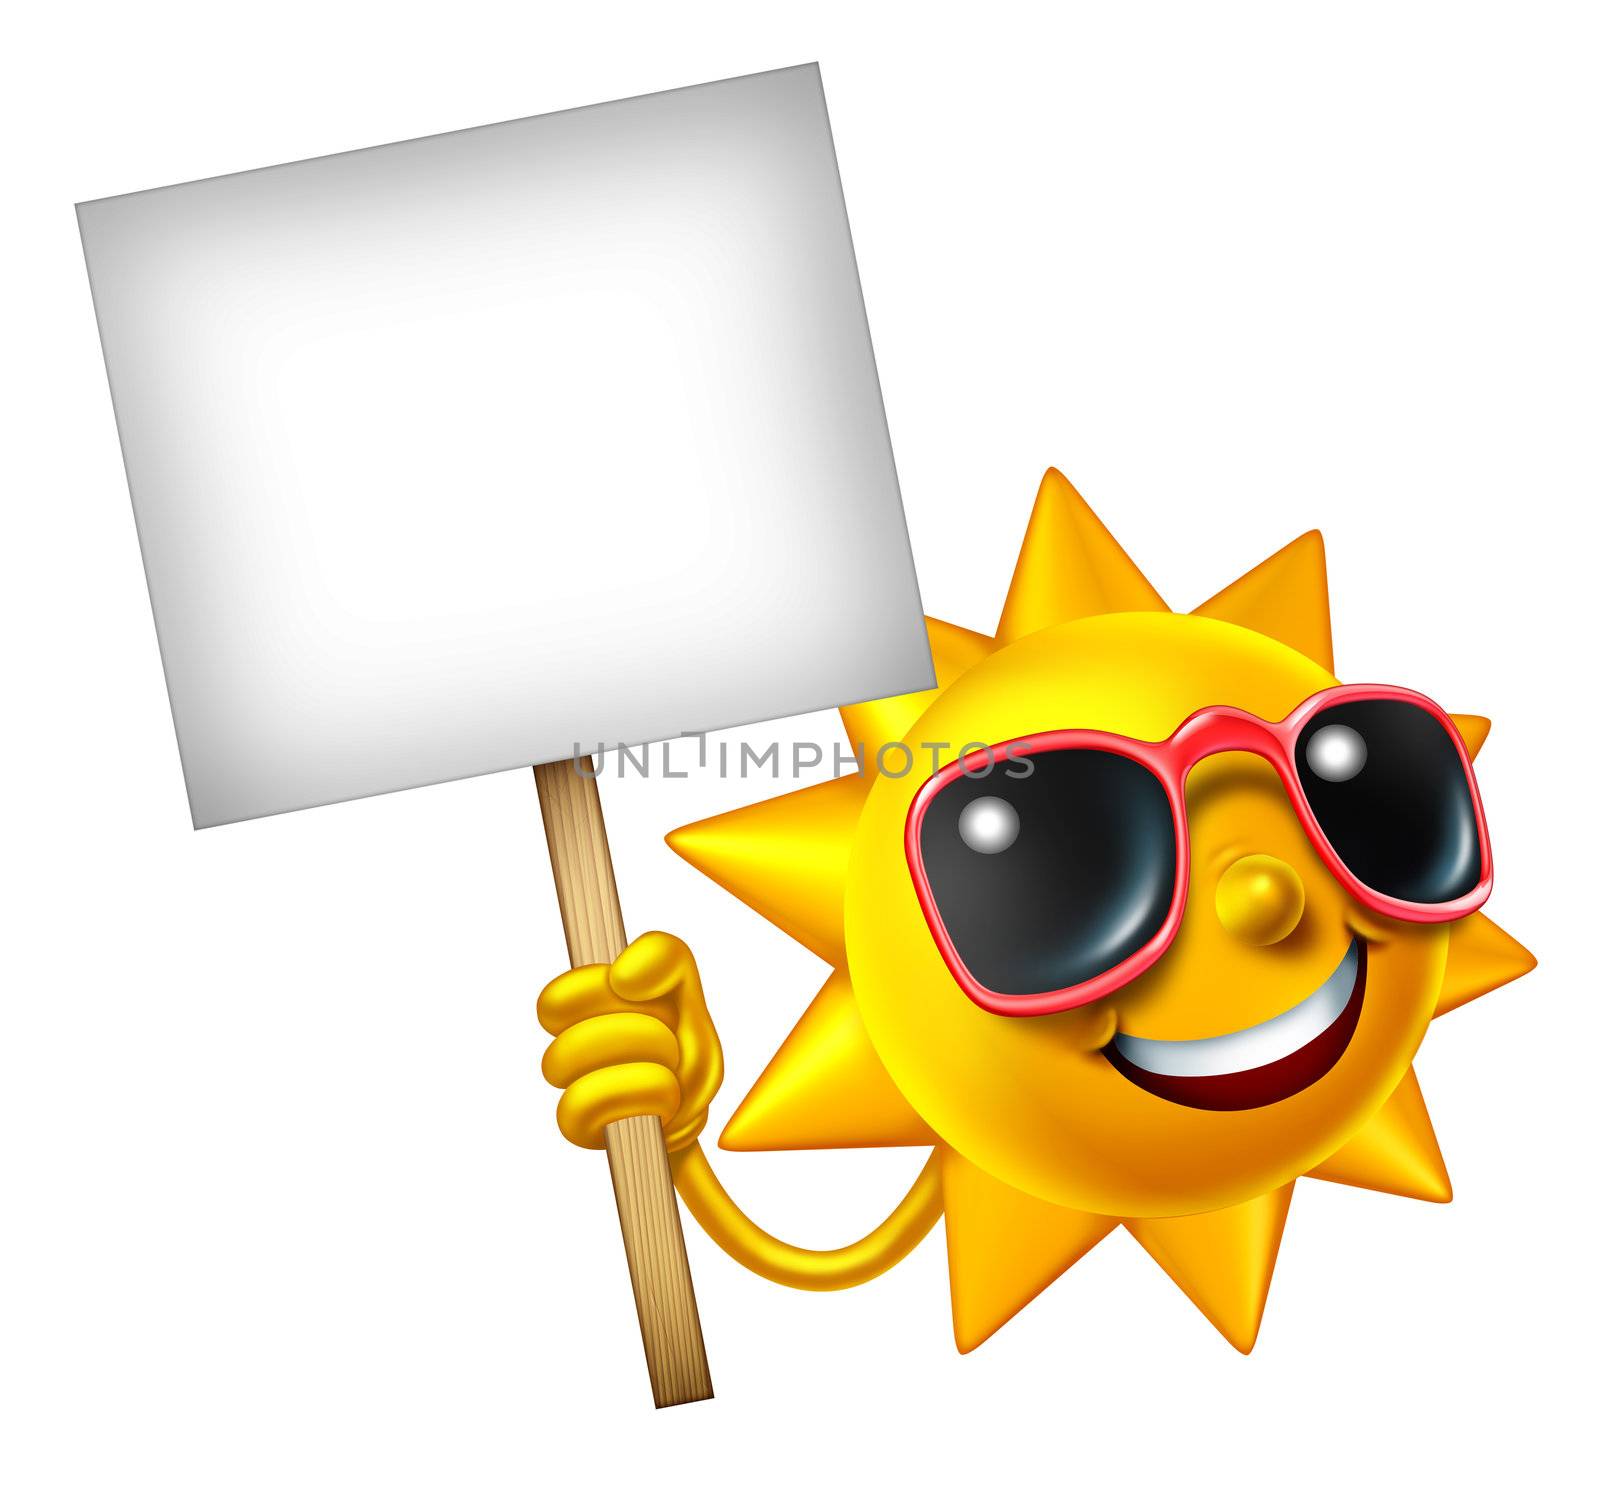 Fun in the sun isolated mascot holding a blank sign as a hot summer three dimensional cartoon character for leisure sunny vacation time and advertisement or communication of holiday relaxation.